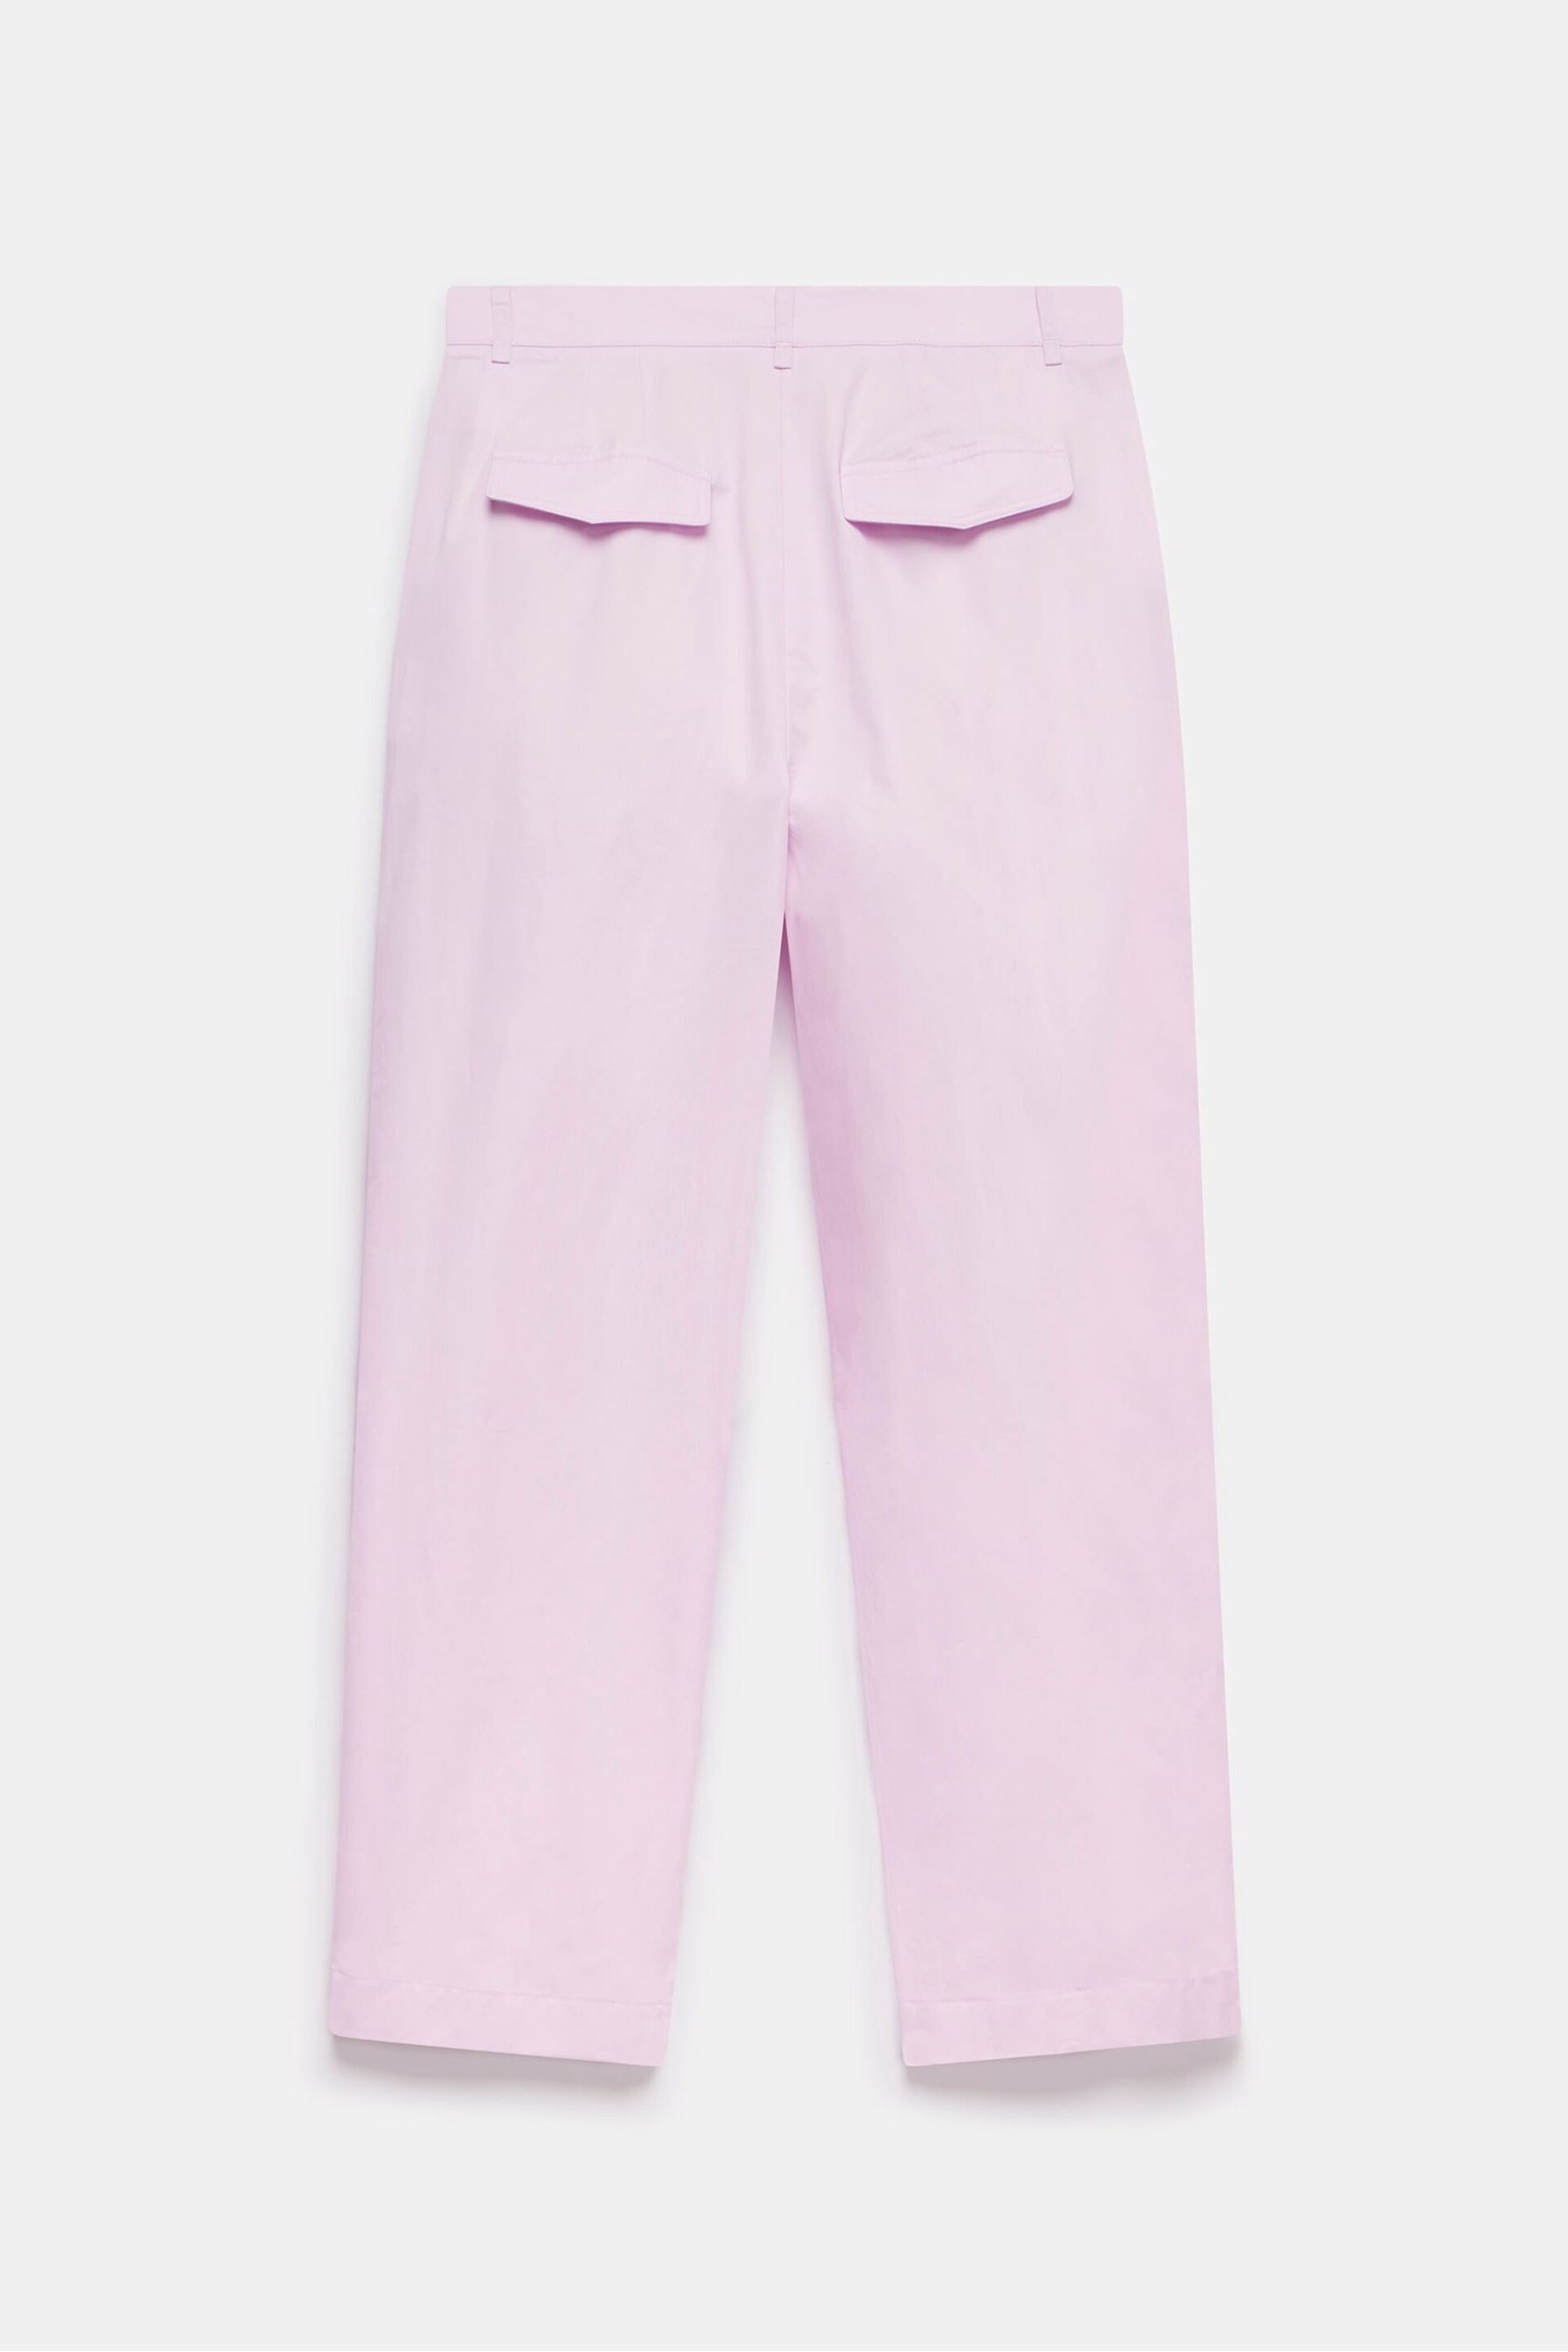 Mint Velvet Purple Lilac Cotton Tapered Pleated Trousers - Image 7 of 8